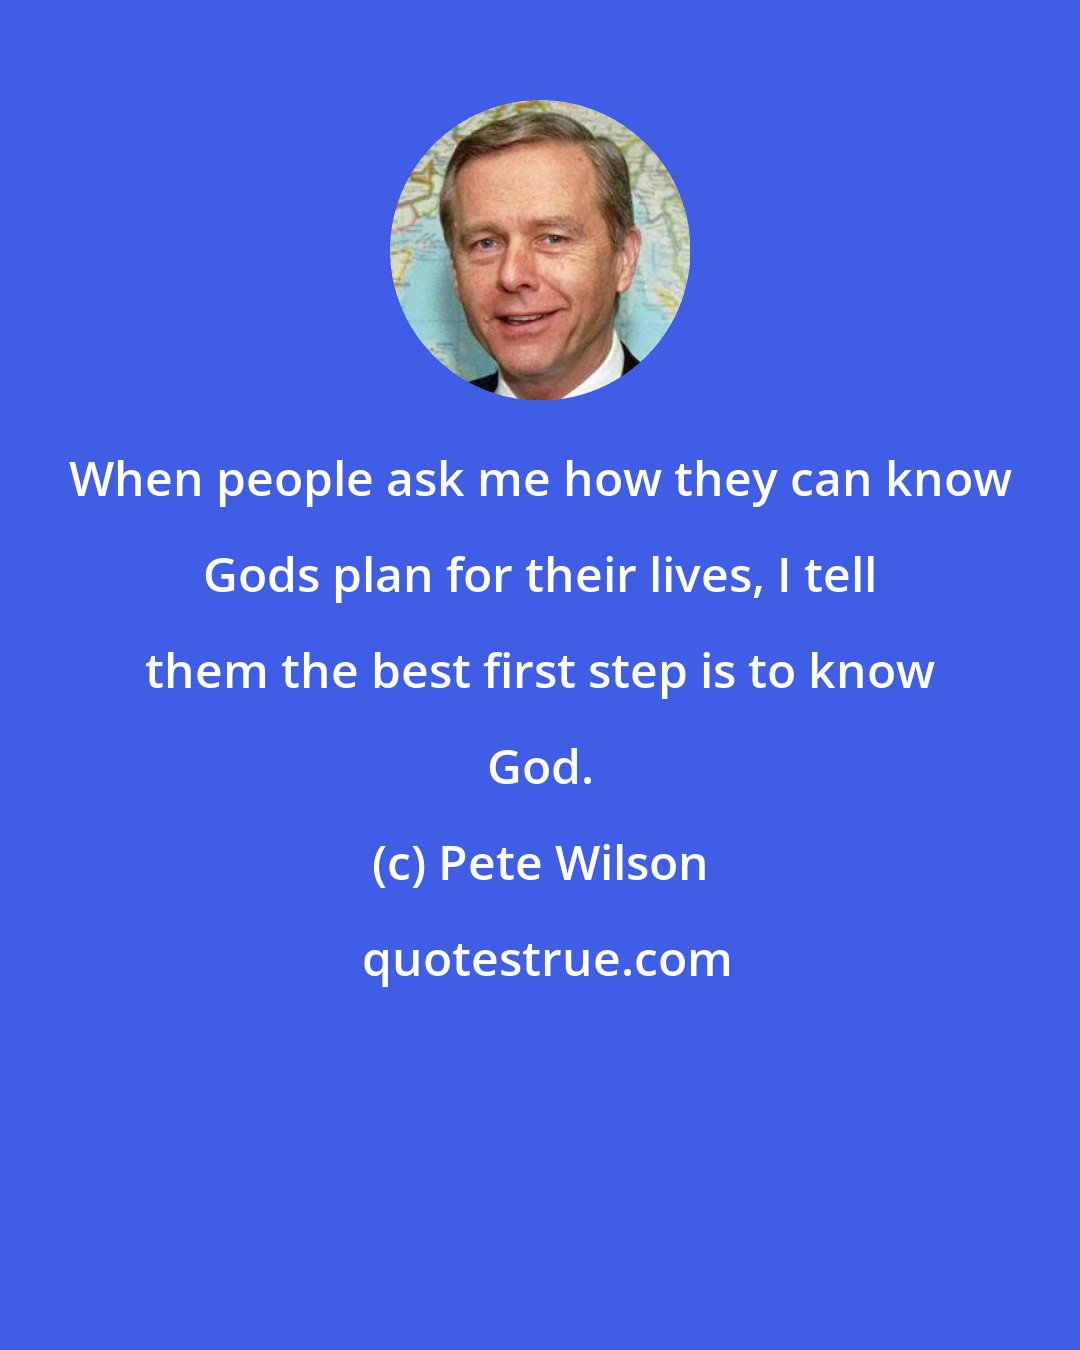 Pete Wilson: When people ask me how they can know Gods plan for their lives, I tell them the best first step is to know God.